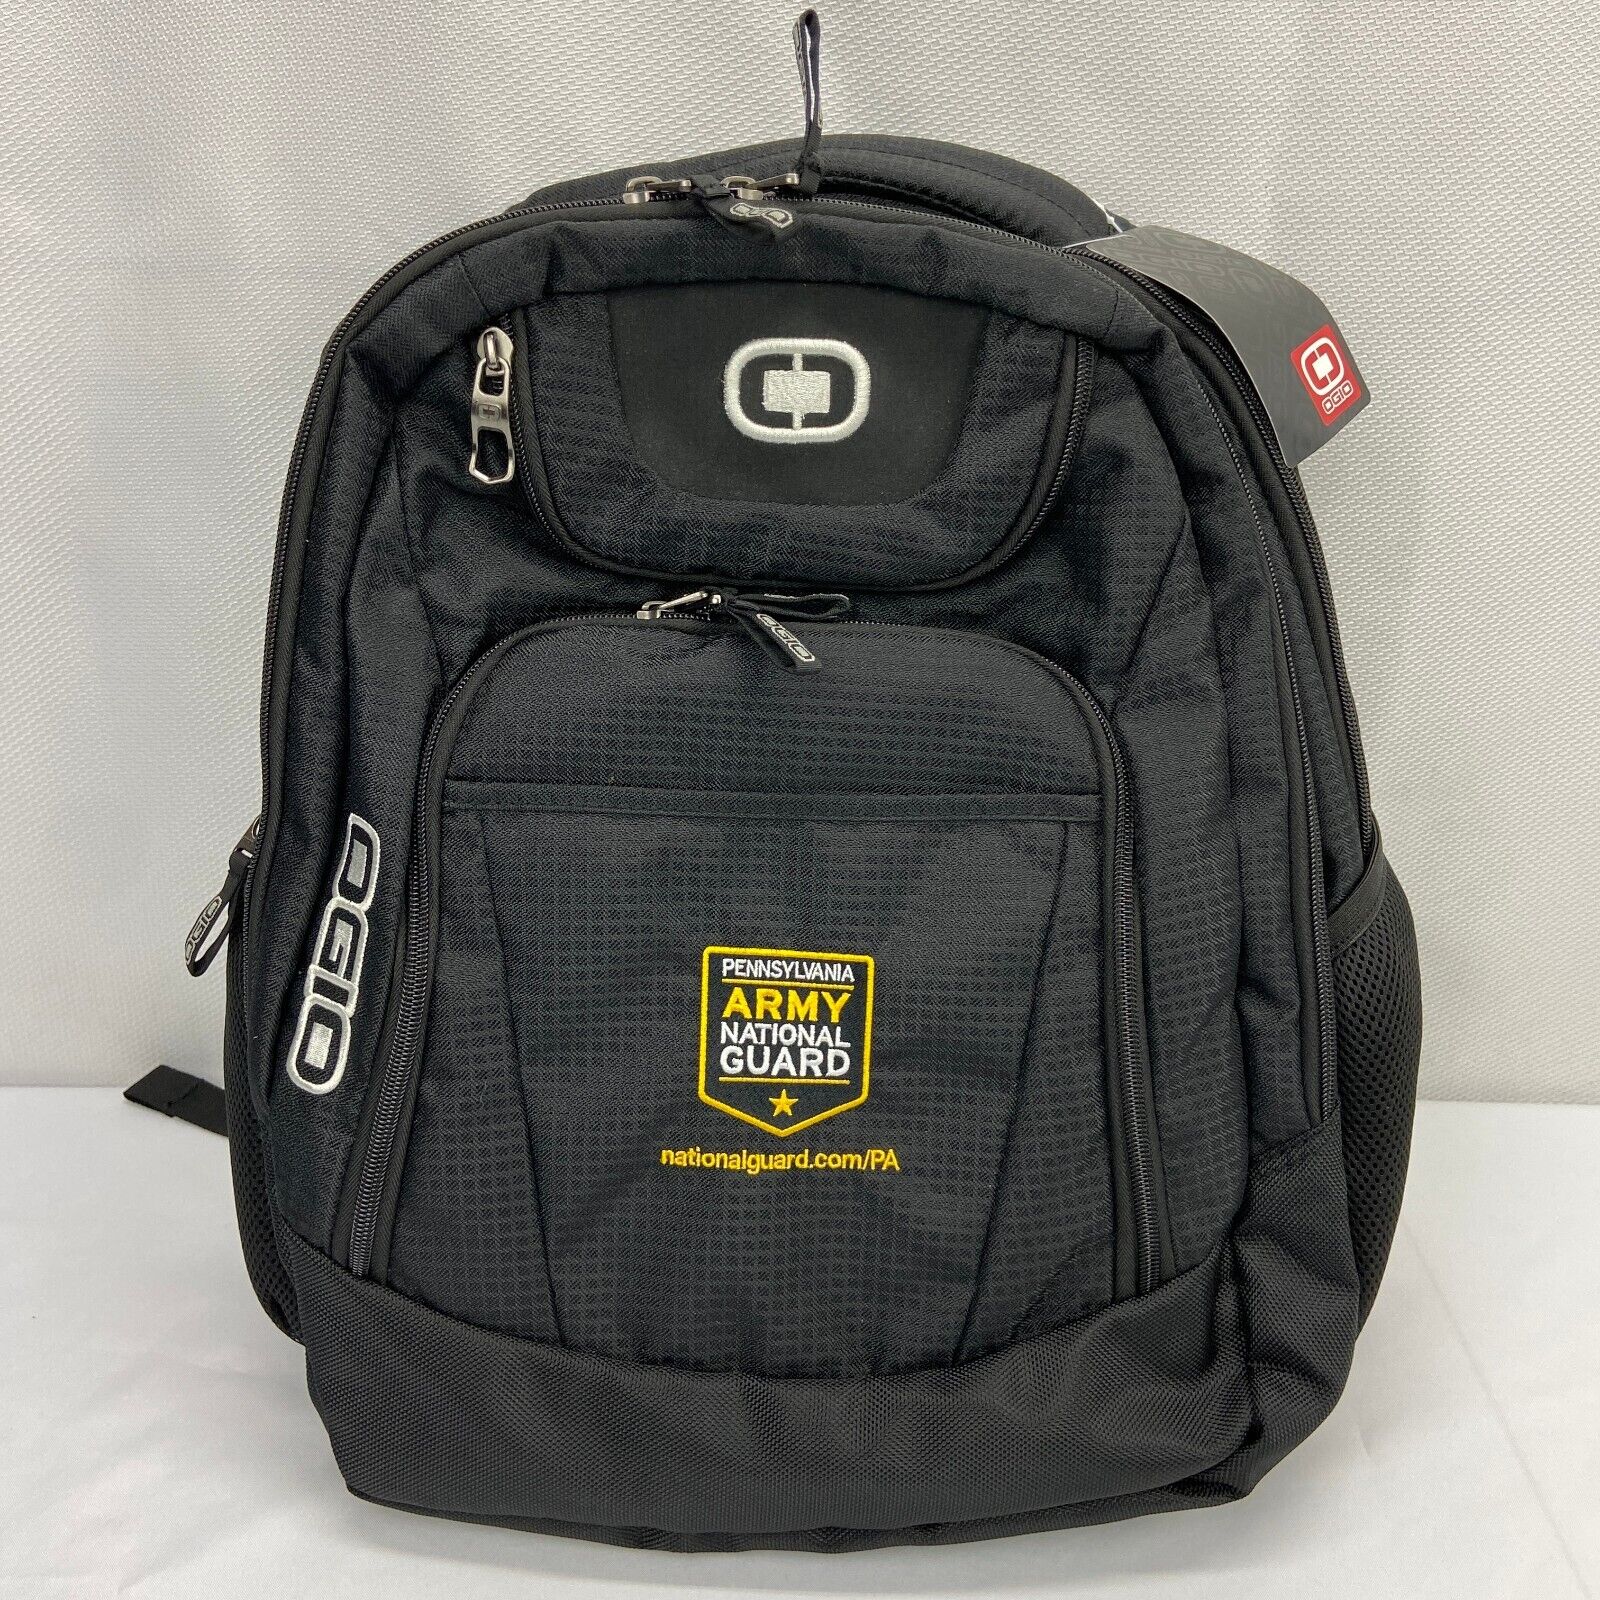 OGIO Excelsior Carry-On Commuter Backpack - Black- Army National Guard Logo New